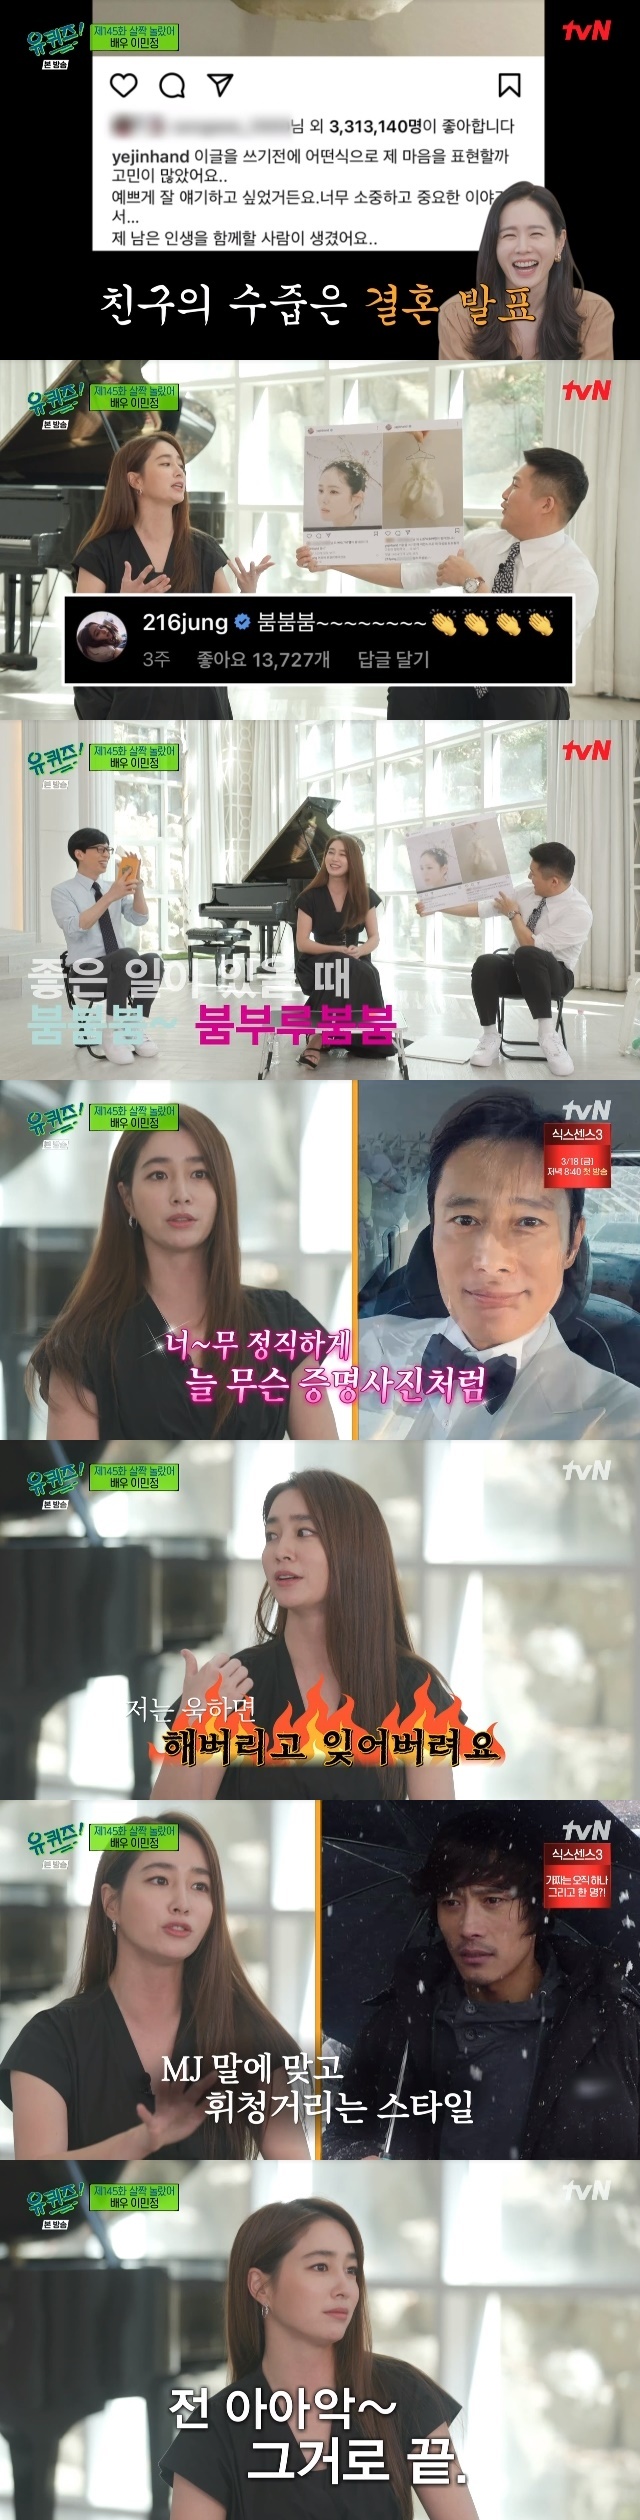 Actor Lee Min-jung has released a story of her husband Lee Byung-hun as well as a collection of furry and pleasant comments on the Internet recently.Actor Lee Min-jung appeared as a guest in the 145th episode of TVN You Quiz on the Block (hereinafter referred to as You Quiz on the Block) broadcast on March 16.Lee Min-jung appeared on the day with a welcome greeting with Yoo Jae-Suk and Jo Se-ho.Yoo Jae-Suk thanked Lee Min-jung, who appeared happily without a publicity issue, and Lee Min-jung looked at the air for a while with a somewhat dry eye and gave a short answer and laughed.Yoo Jae-Suk, a married man, responded that he was okay.Lee Min-jung had a good relationship with Jo Se-ho, unlike meeting with Yoo Jae-Suk in 10 years.Not long ago, Jo Se-ho had eaten giblets with his acquaintances, Lee Min-jung, instead of calculating the food price.This was a relationship that saw Lee Min-jung, the son of Lee Byung-hun and his wife, Junhu Countys first birthday party; Jo Se-ho said, It was almost like an awards ceremony society.There were various stars such as Song Seung Heon and Son Ye-jin in front of him. Lee Min-jung recalled that Jo Se-hos society was very pleasant and happy, such as catching money.Lee Min-jung recently made a big topic with SNS comments that speak like a neighborhood with a pure face.When a netizen commented on a long comment, Enough fur love, he said, Pakeper indie, and when Son Ye-jin posted a picture of the picture, he said, I have to be confused with my head.In particular, Lee Min-jung posted a applause emoticon with a comment saying Boom Boom Boom when Son Ye-jin announced his marriage to Hyun Bin through his SNS.Asked what this means, Lee Min-jung said: Friends have a joke when theres something good going on between them, in fact, no one knows this accent.Everyone wanted to know this because people were so funny. Its a cheer among the friends. Lee Min-jung was a sniper on her husband Lee Byung-hun SNS.Lee Min-jung, who received a coffee tea, laughed at Lee Byung-huns photo by commenting a look-out (pretty cute).However, Lee Min-jung said, I do not know what I mean, and I asked him what he was saying.Lee Min-jung also commented on Lee Byung-huns selfie, I dont think I can take a selfie, Ive always been so honest, like a proof photo.It is the obsession of the elders who have to do so.In addition, Lee Min-jung commented on Lee Byung-huns black and white Graduation Picture post, Black and white Graduation Picture, I will honor you.Lee Min-jung said, Its funny. Im not supposed to be kidding you, but Im actually surprised. Im really, really sorry. Ill respect you.I think I was too close, he said.Lee Min-jungs outspoken revelations about Lee Byung-hun have followed.Lee Min-jung answered Jo Se-hos question, I see a lot of cool things, and in fact I see a lot of cool things if I live together.Jo Se-ho did not care, saying, It is cool to see a man with a bass voice and feeling. Lee Min-jung expressed his awe of Lee Byung-hun, but Lee Min-jung continued to laugh, saying, When I am together, I have a lot of highs than bass.I definitely forget my personality, so I do not have much stress, but my brother is a style that hits me, a style that endures.Its nice and gentle, being right and (slunging) and kind. My mom and dad say, Min-jung, kill your temper. Im all grown-ups, and Im all over it.But its a good style after solving it, because theres nothing stacked up. (On the other hand) thats hard on you, she said of the couples anti-Kimi.Lee Min-jung asked his son Junhu what he said a lot. When I was a child, I said something sweet like I love you, and now I feel like Im closing my ears.Theres not a lot of kids who call me Yes, Mom. The man says he doesnt touch, he doesnt talk to me without eye contact, he doesnt listen to anything.Thats the same for my husband, he said, naturally mentioning Lee Byung-hun again.On the contrary, Lee Byung-hun was asked what he often heard. Lee Min-jung said, You said it. I forgot a lot.You said this and why didnt you do it (I hear a lot) and said, I said this.Finally, Lee Min-jung expressed his affection for his son Junhu, saying, The moment when the baby first mothers, I do not know how to do it, so I miss it.In the meantime, Lee Min-jung said, Yes, I am your mother, which I want to leave in the article.